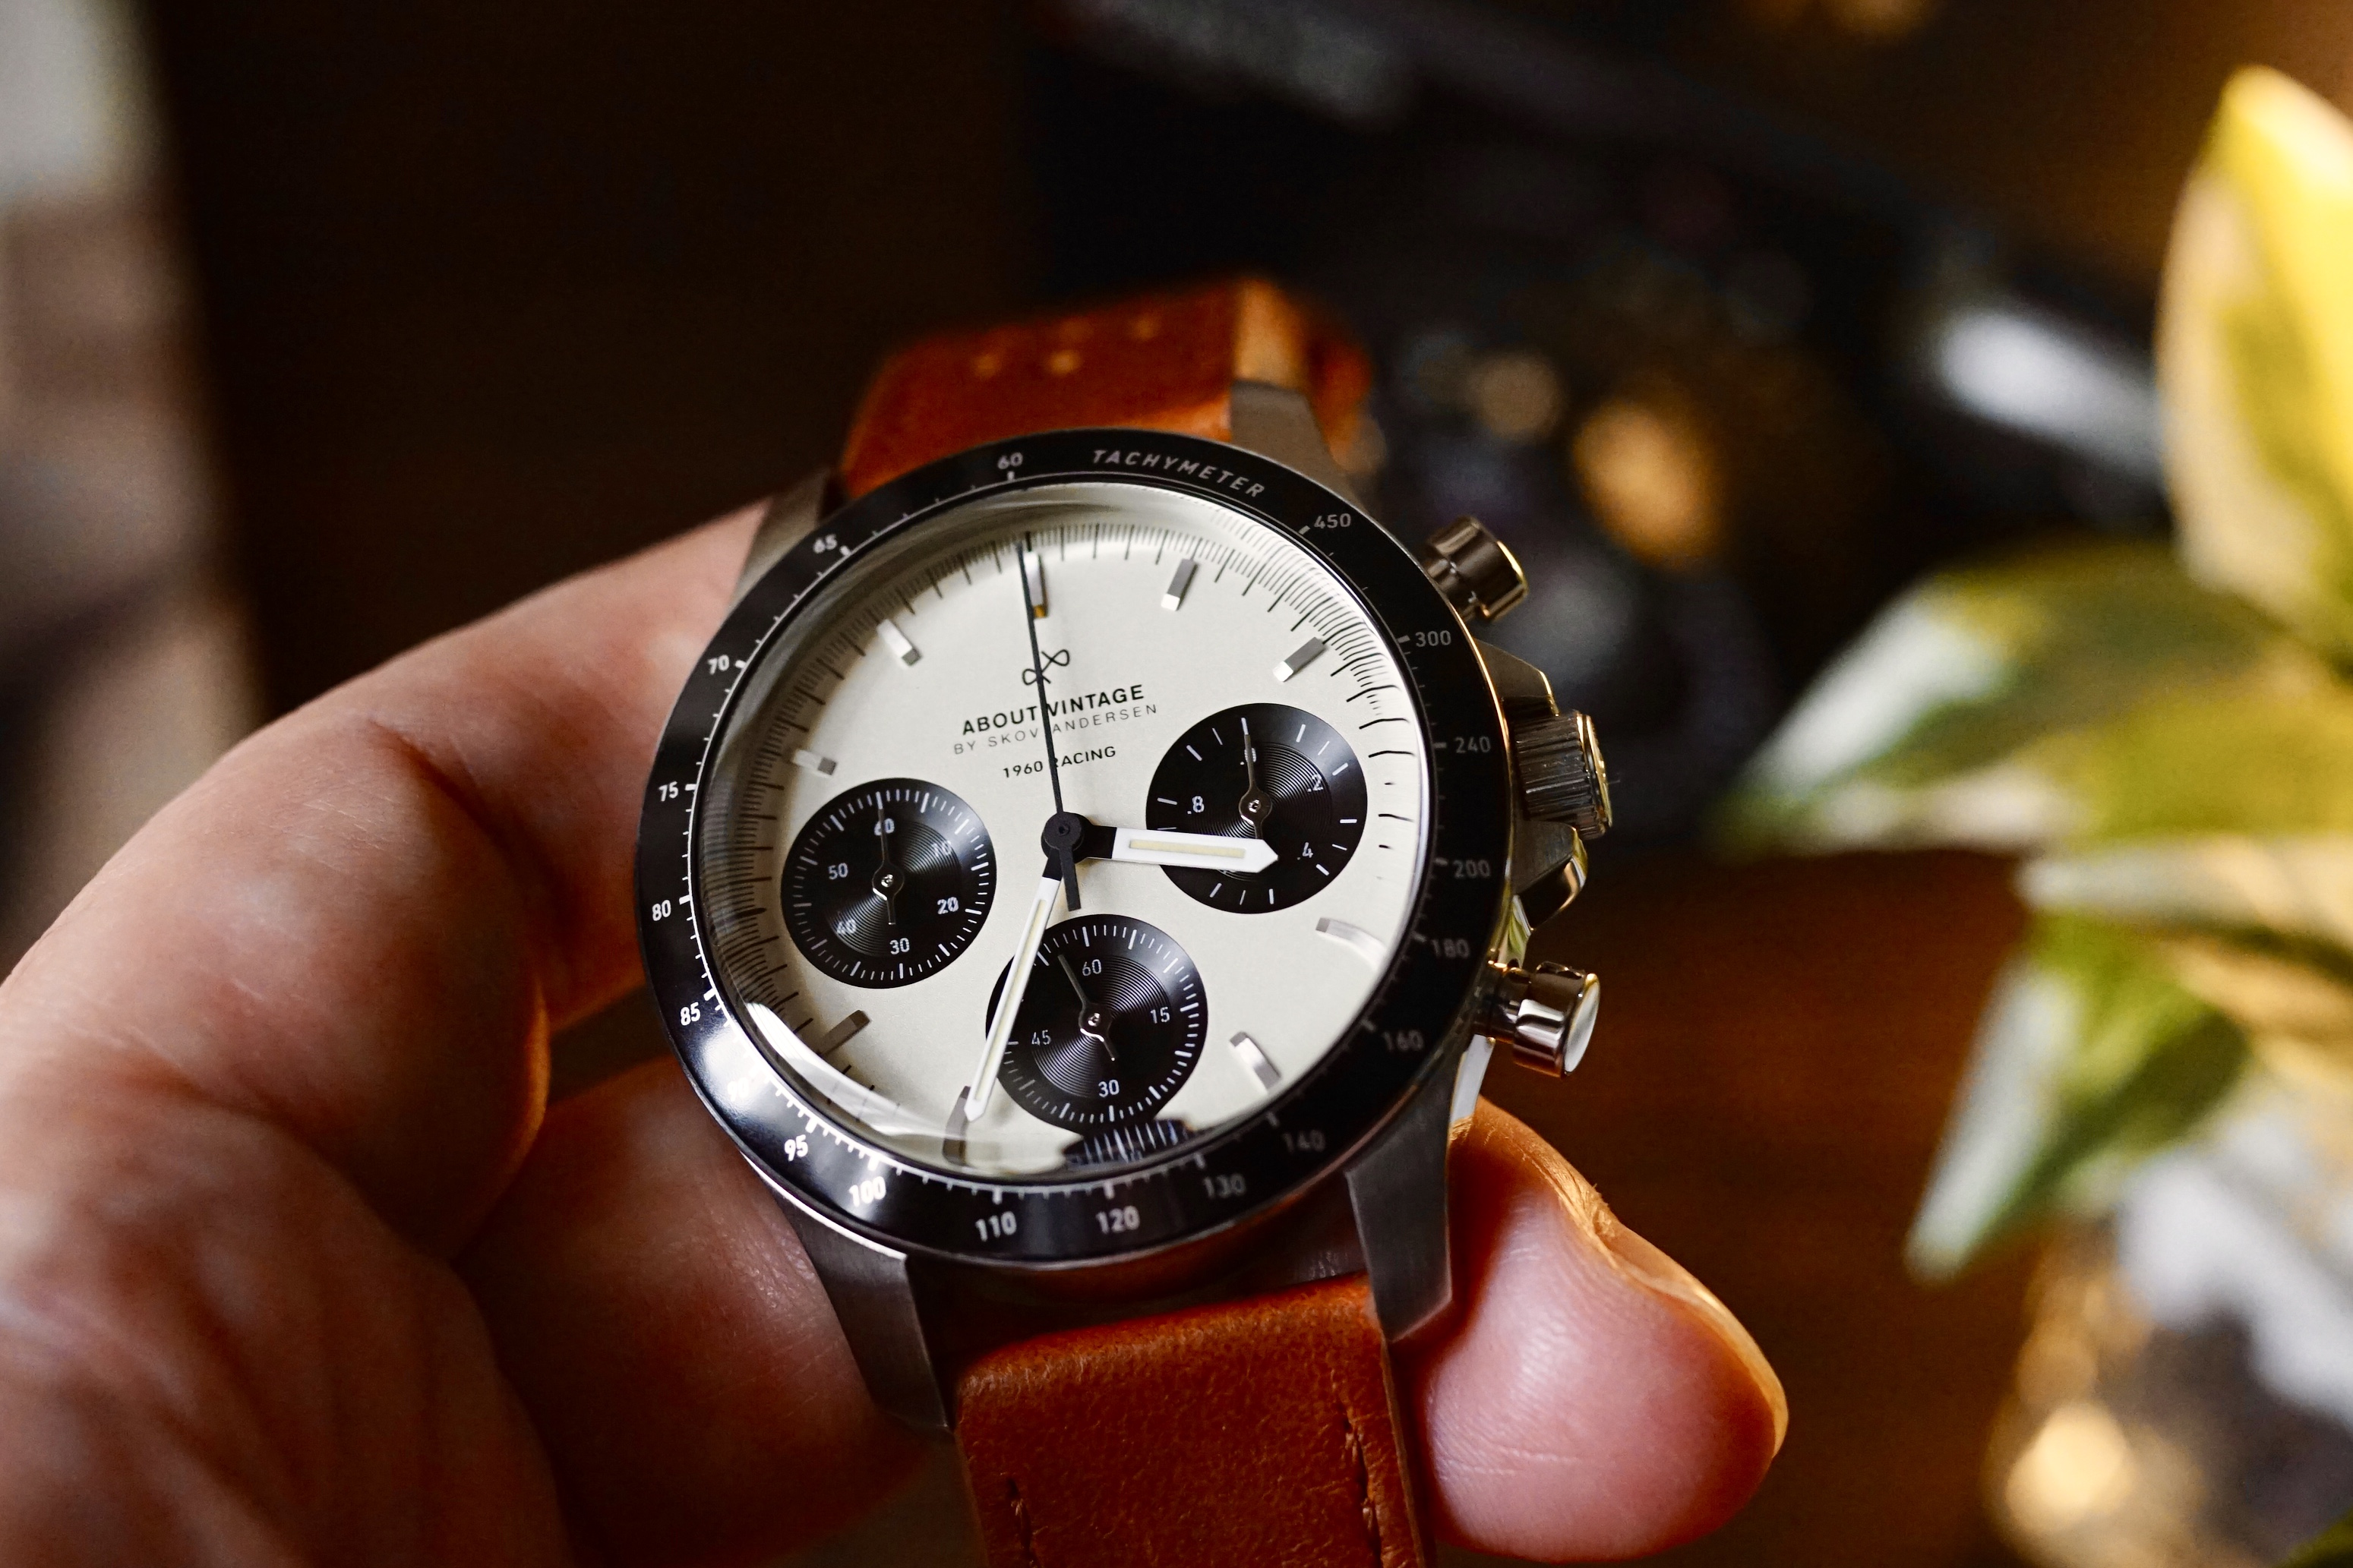 About Vintage 『1960』RACING CHRONOGRAPH イメージカット　30